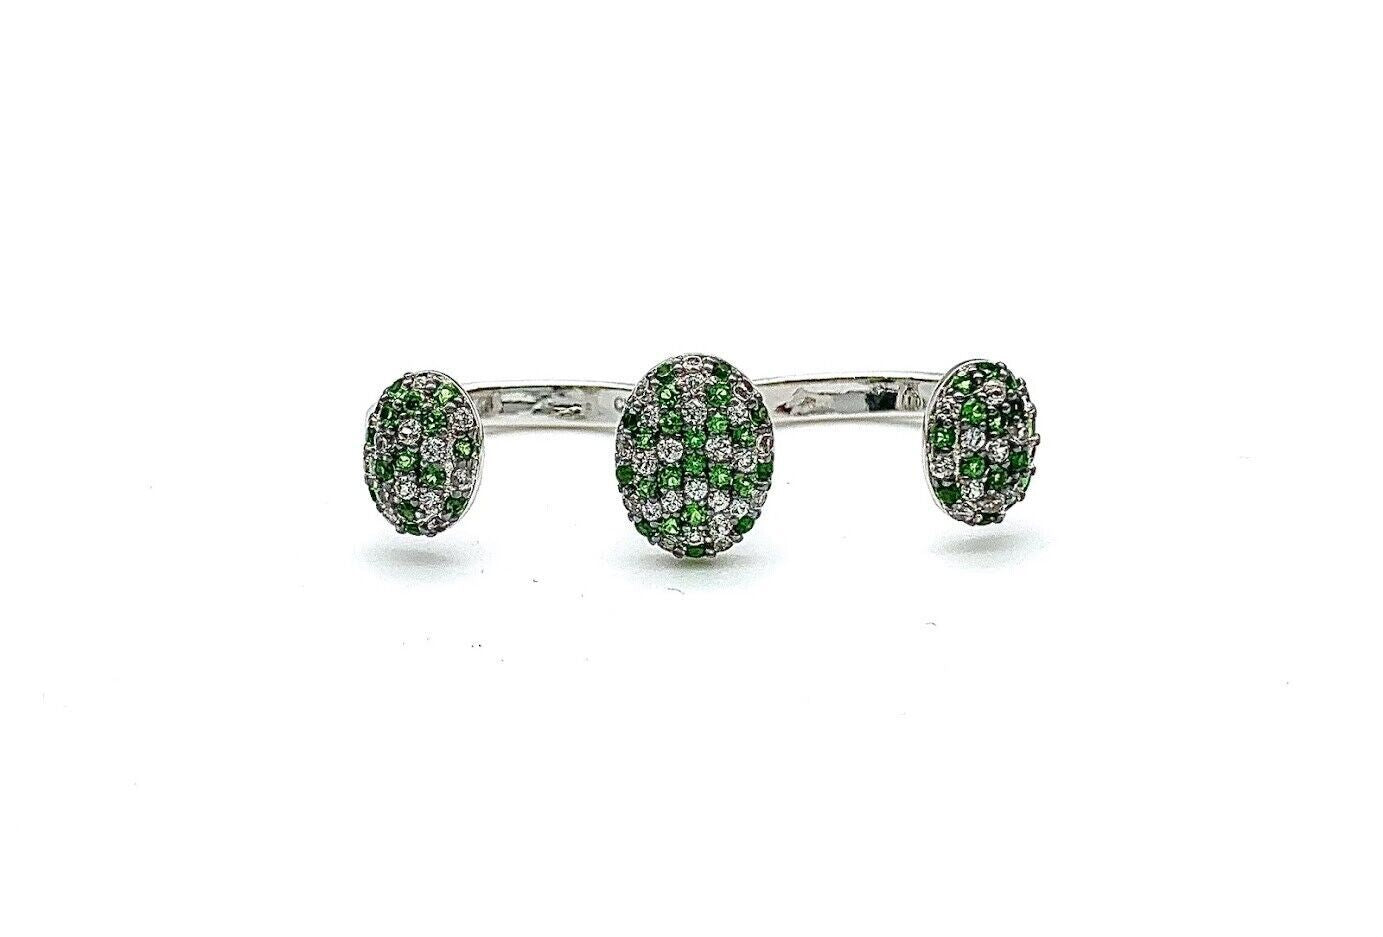 Rarities Sterling Silver Chrome Diopside & White Zircon TwoFinger Ring. Size 7-8